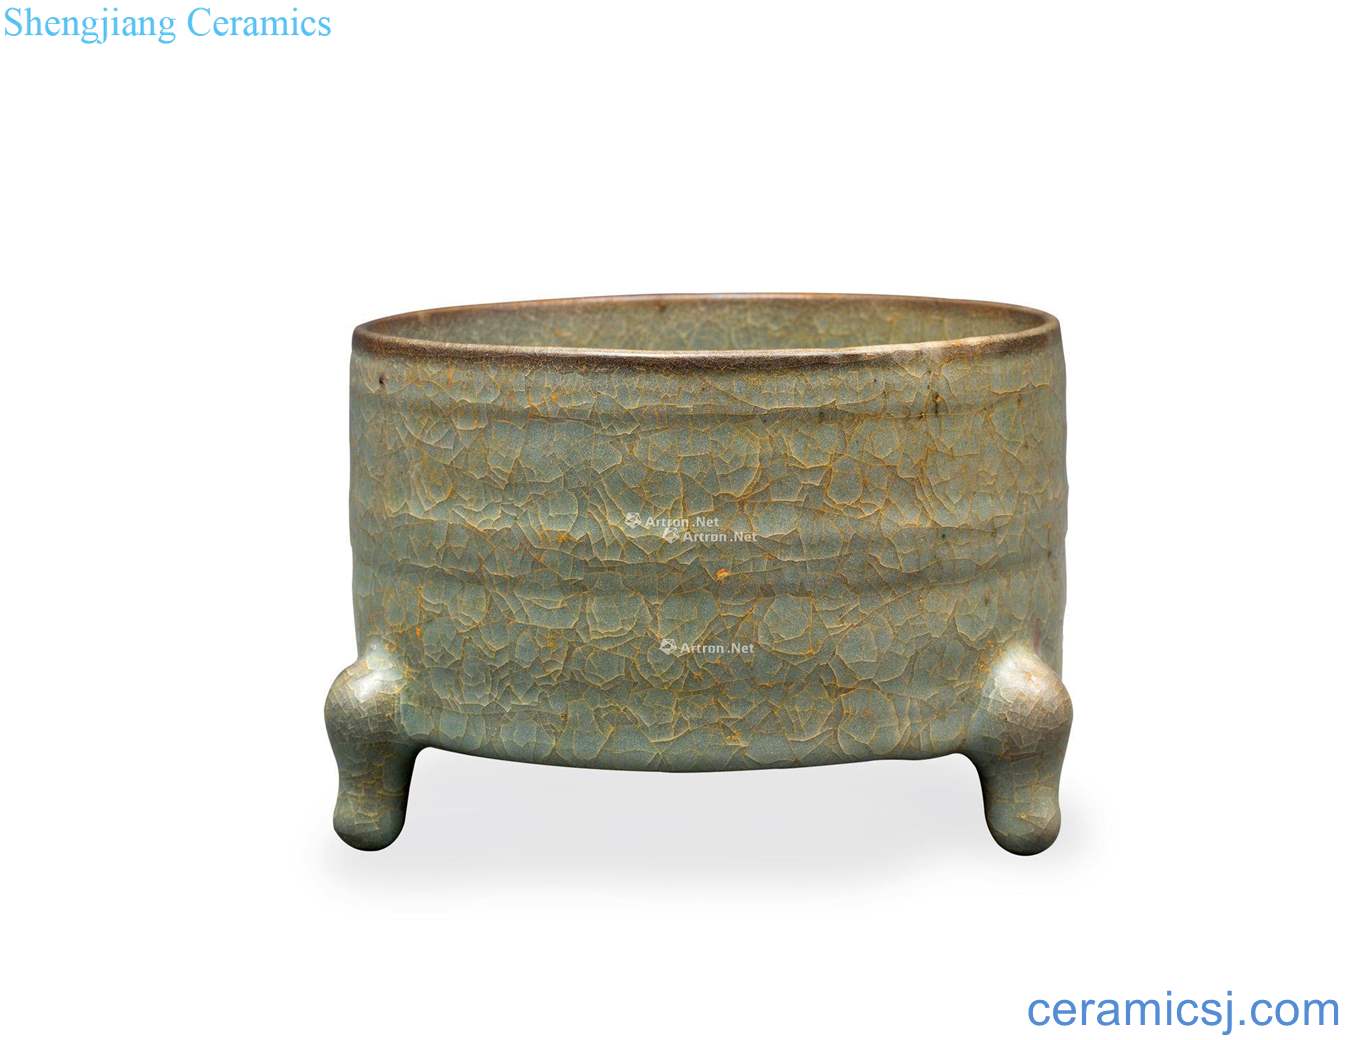 The song dynasty Your kiln bowstring grain furnace with three legs